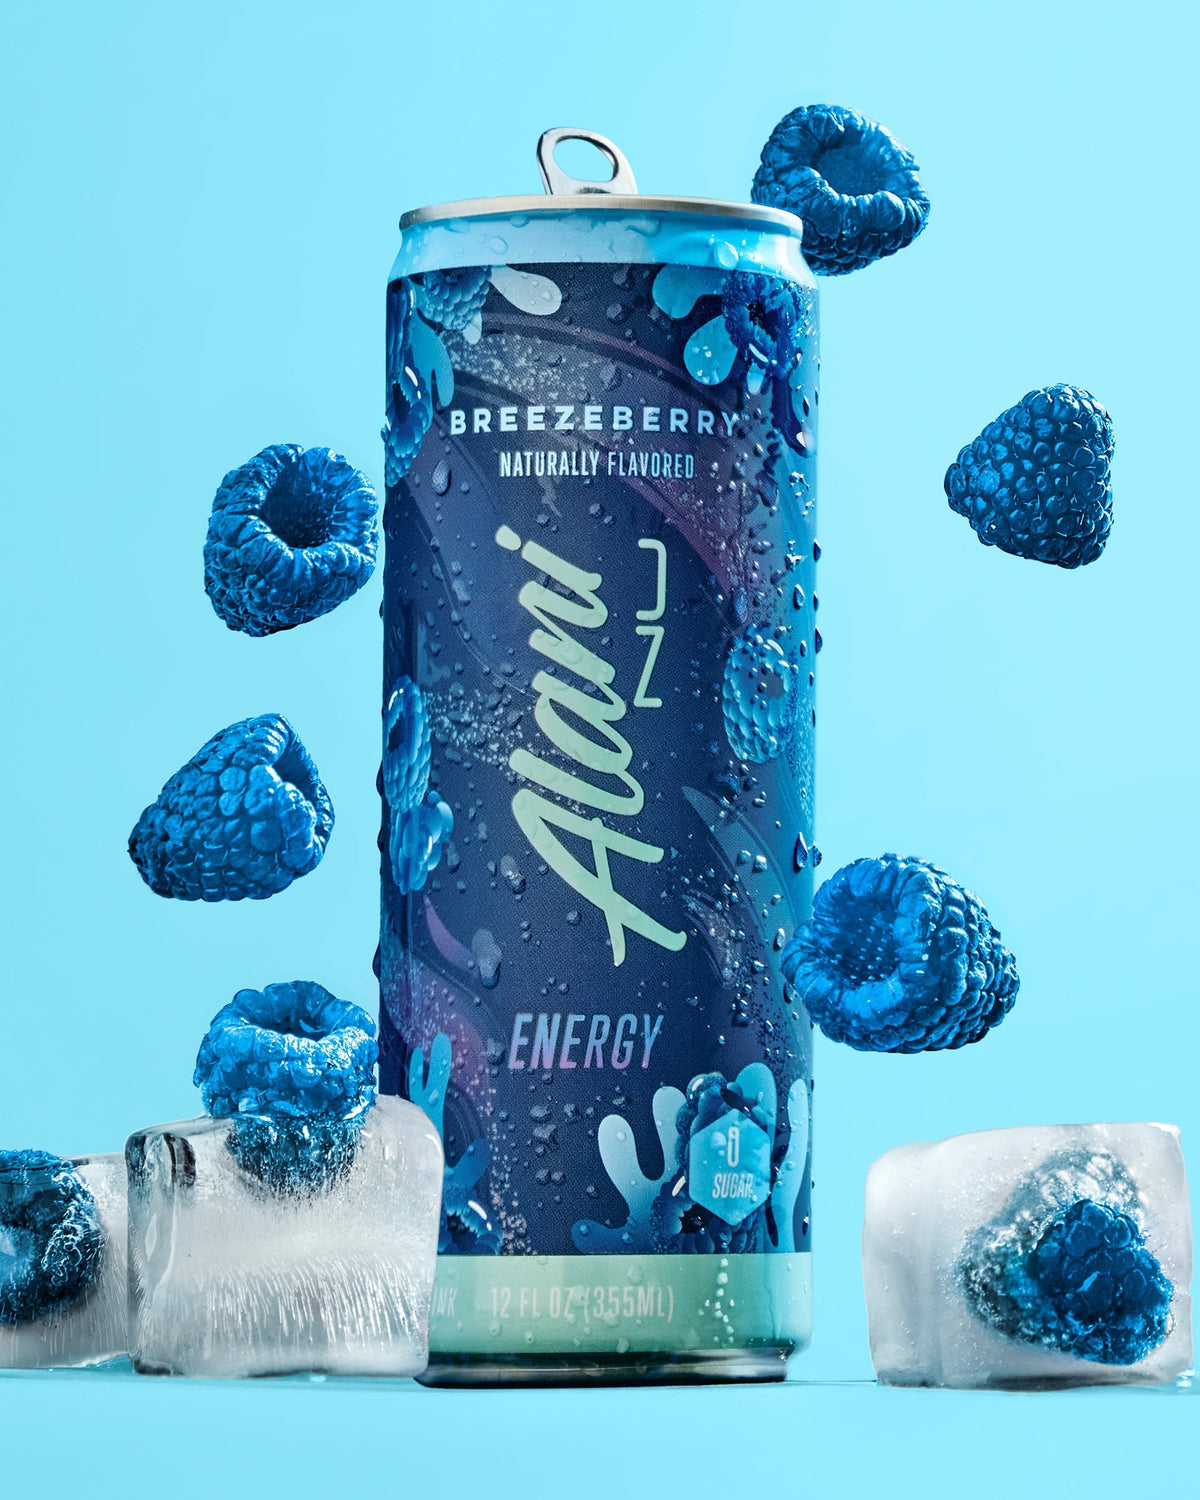 A 12 fl oz can of Breezeberry energy drink surrounded by ice cubes.